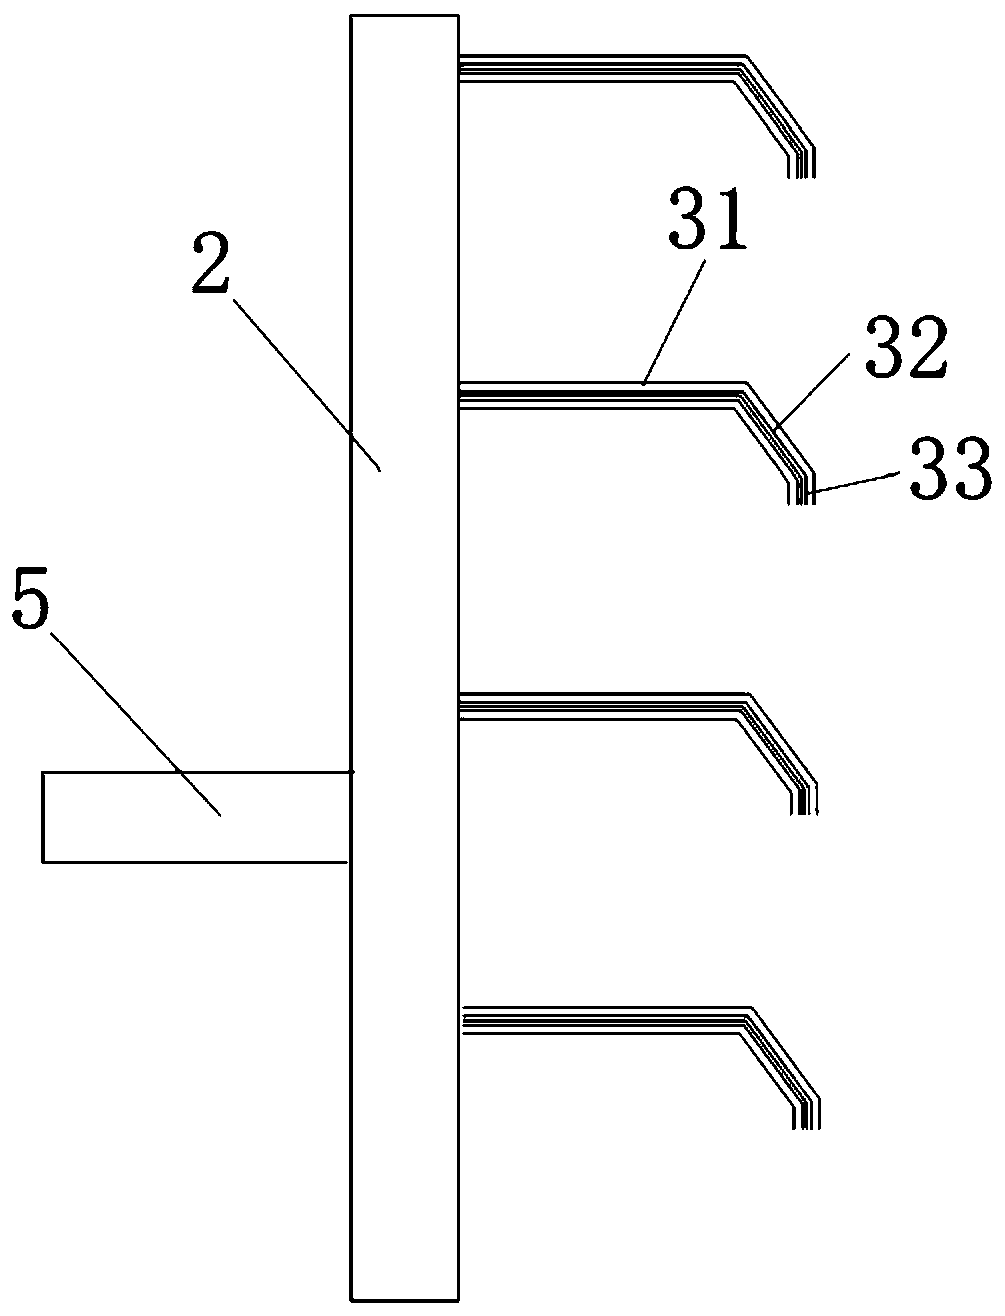 On-line processing device for scratch of continuous casting bloom